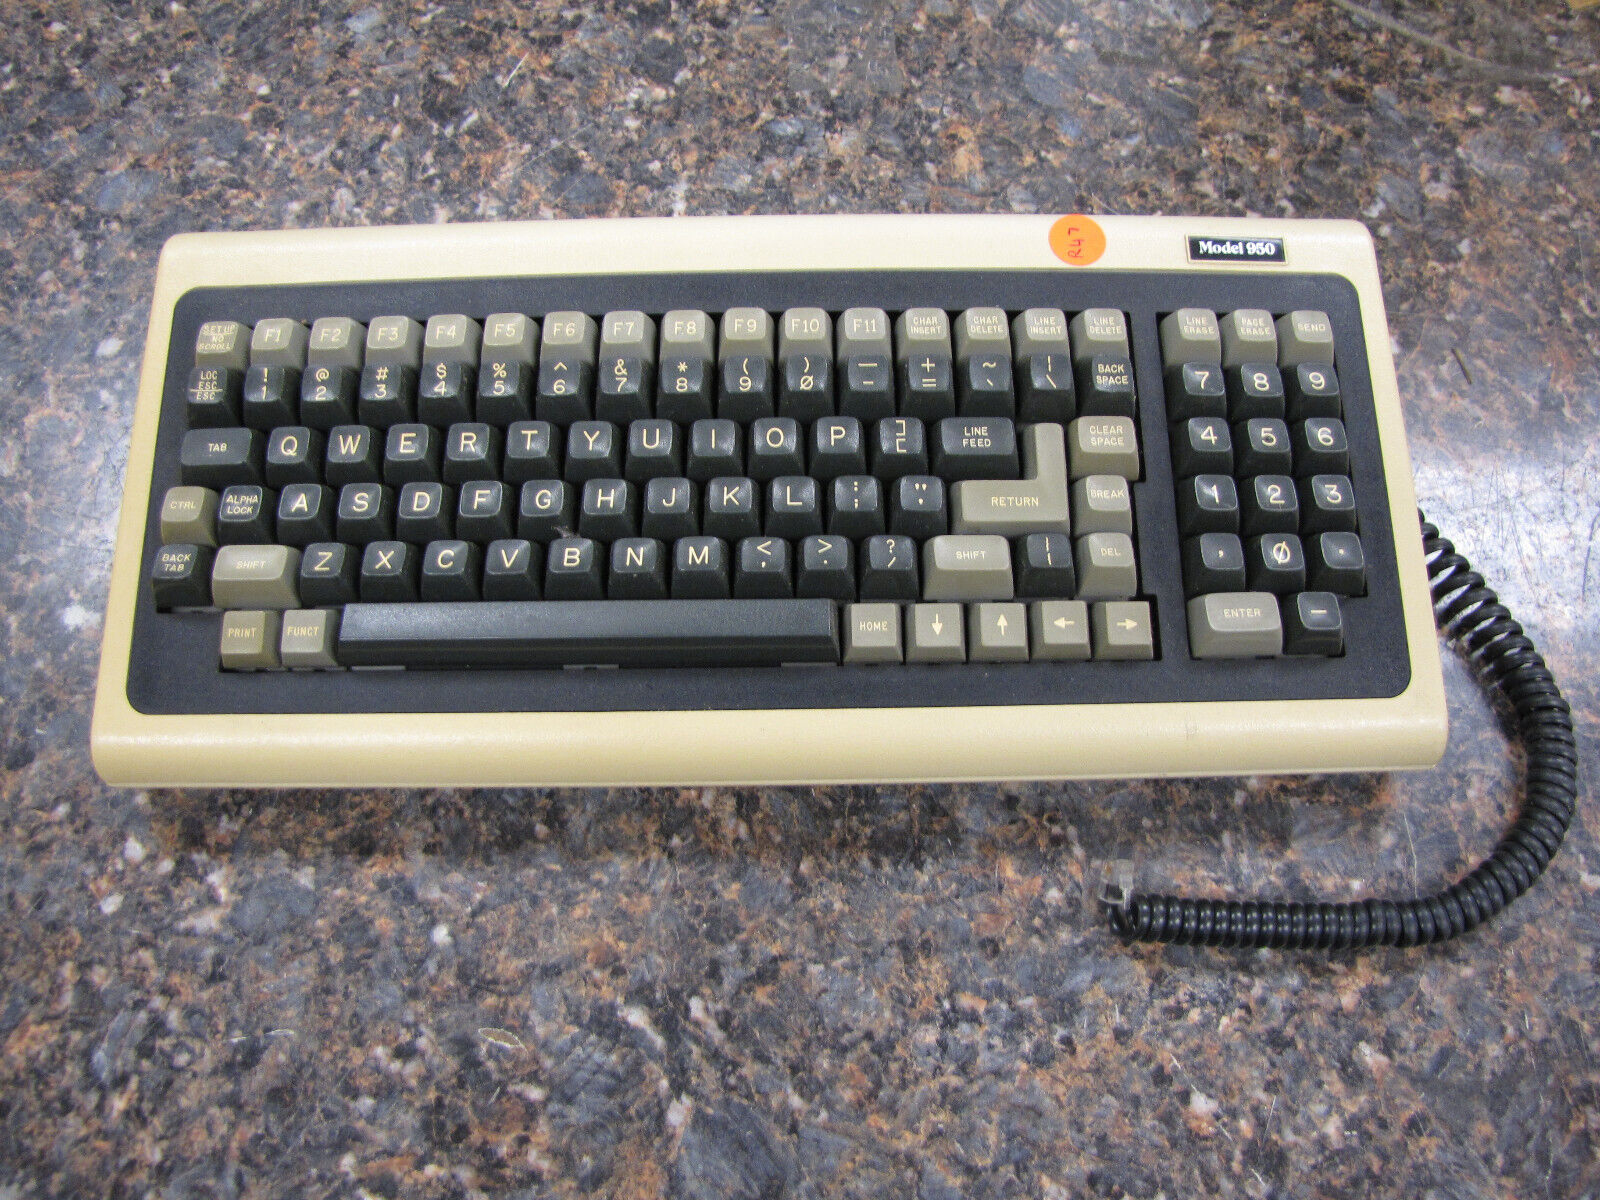 Vintage TeleVideo Model 950 Computer terminal Keyboard with cable - very nice